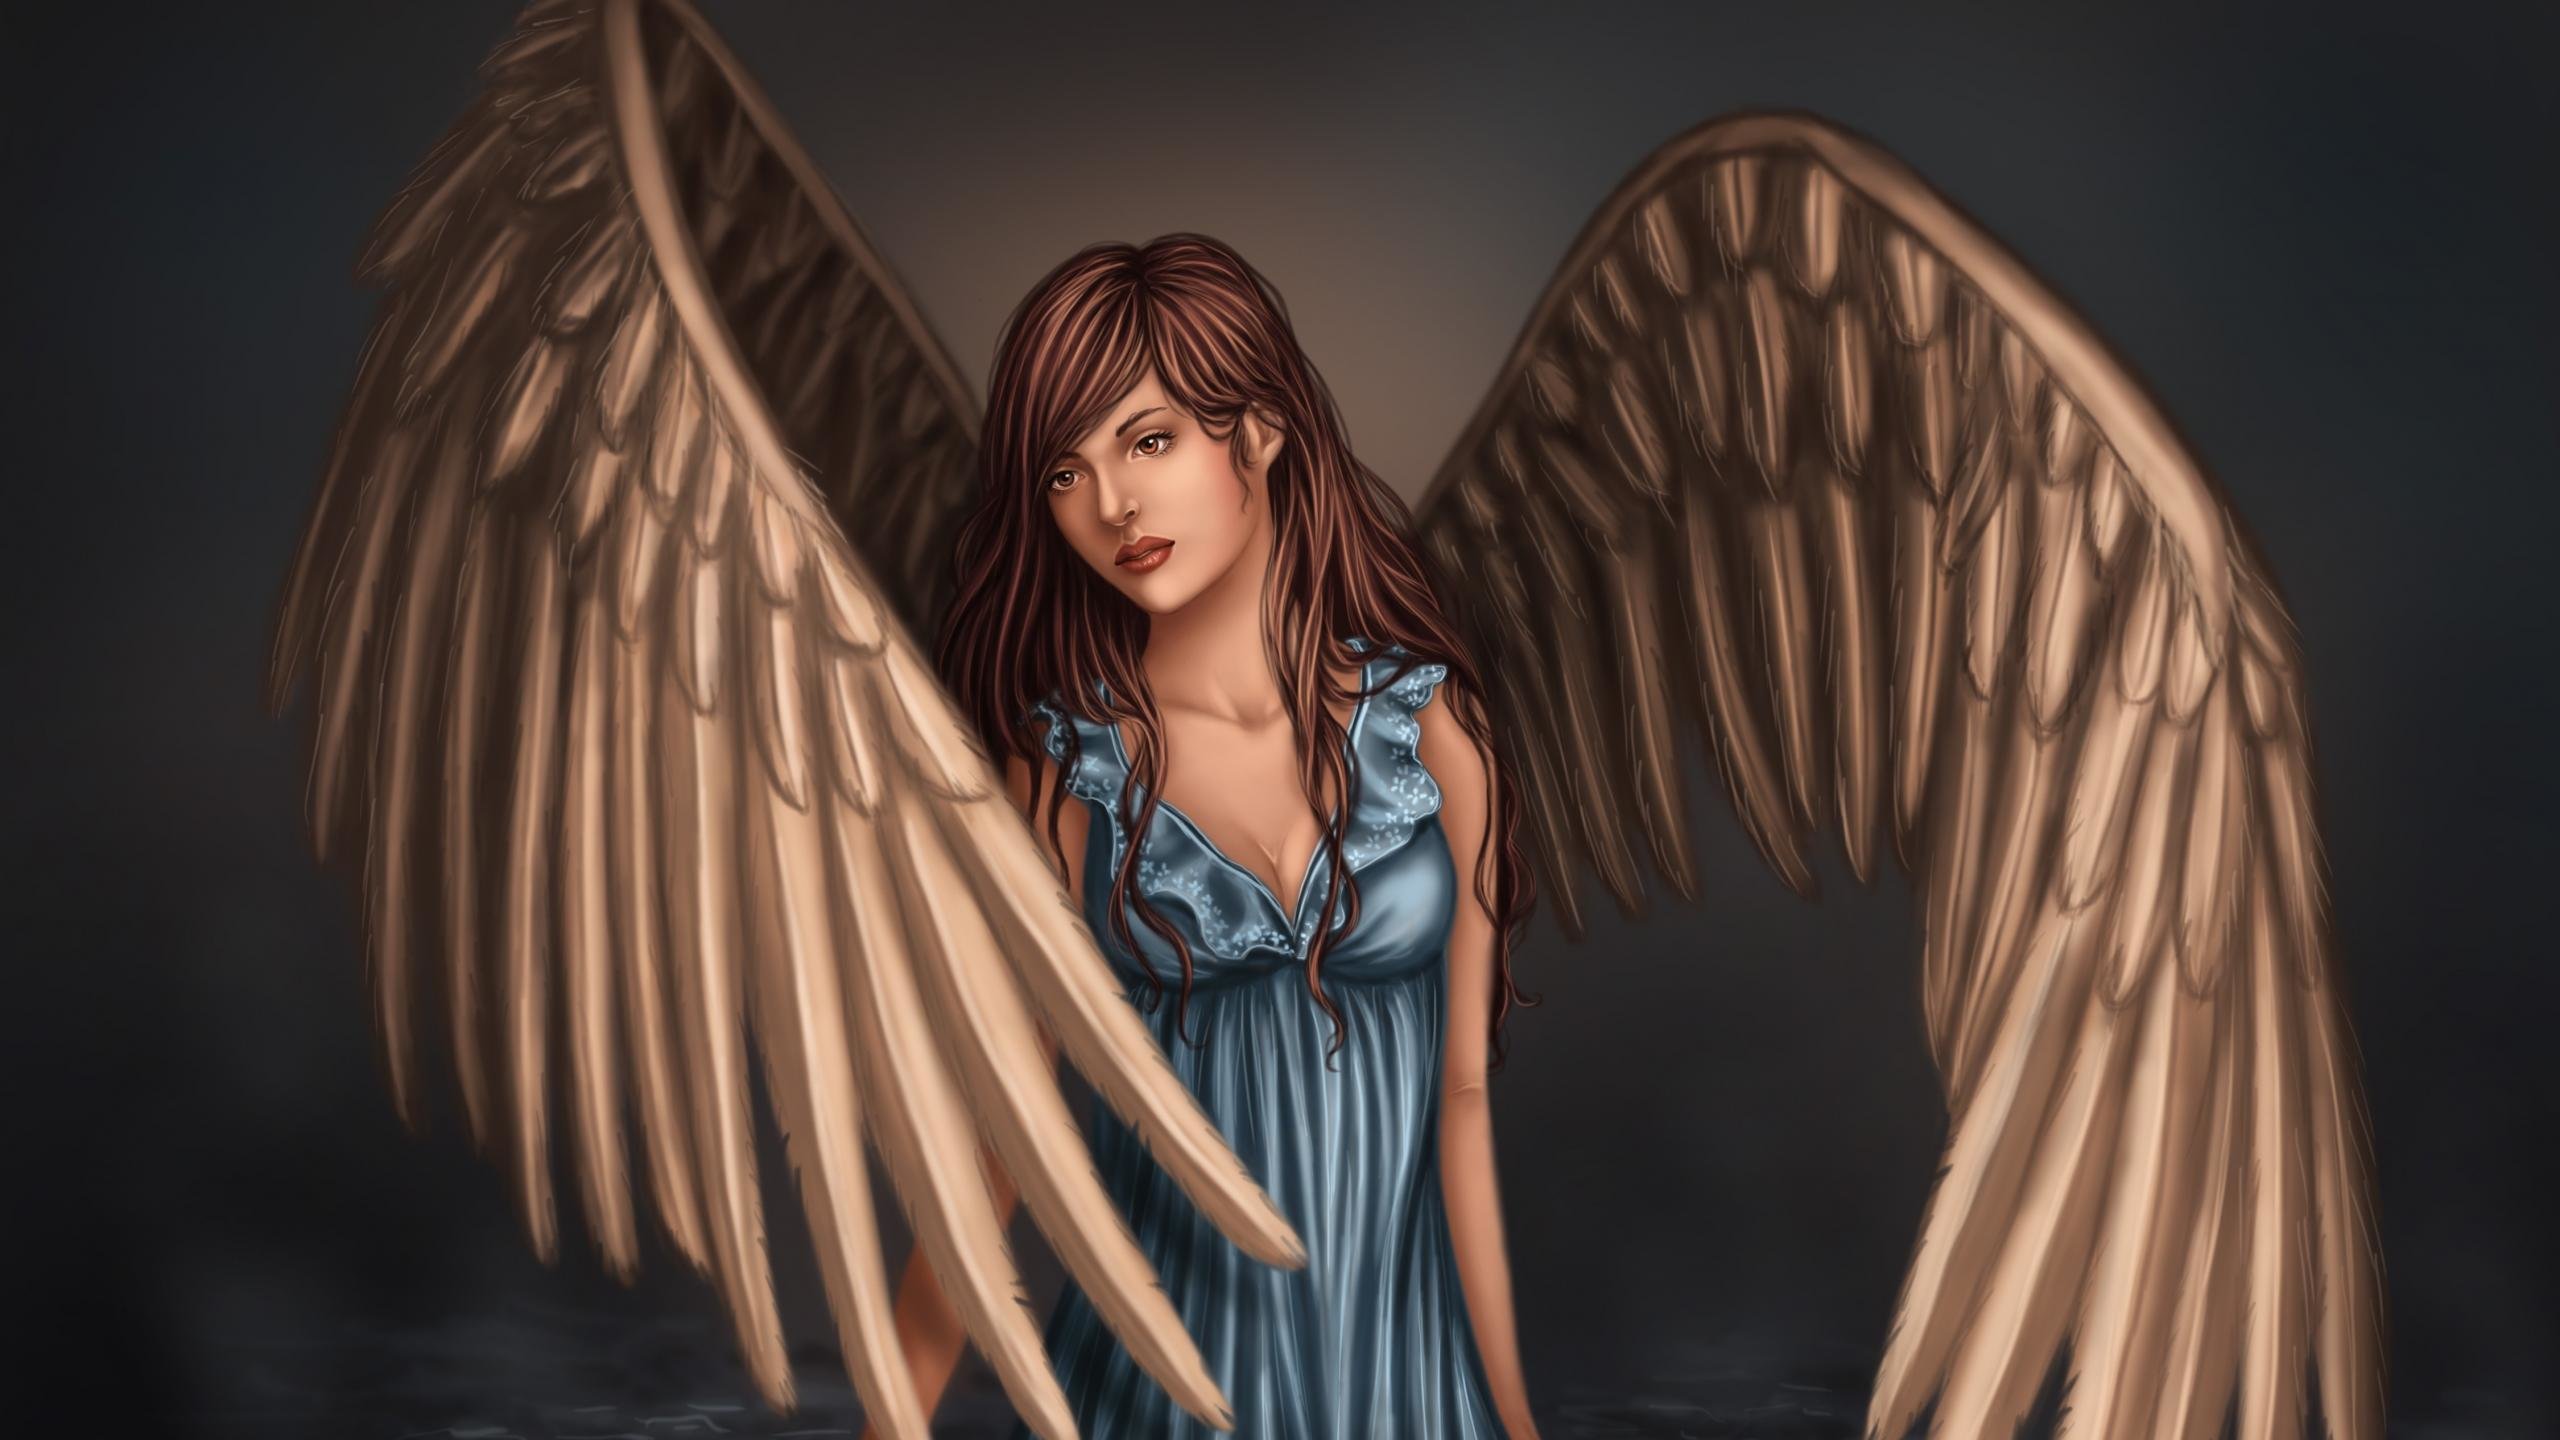 Free download Angel wallpaper ID:7688 hd 2560x1440 for PC